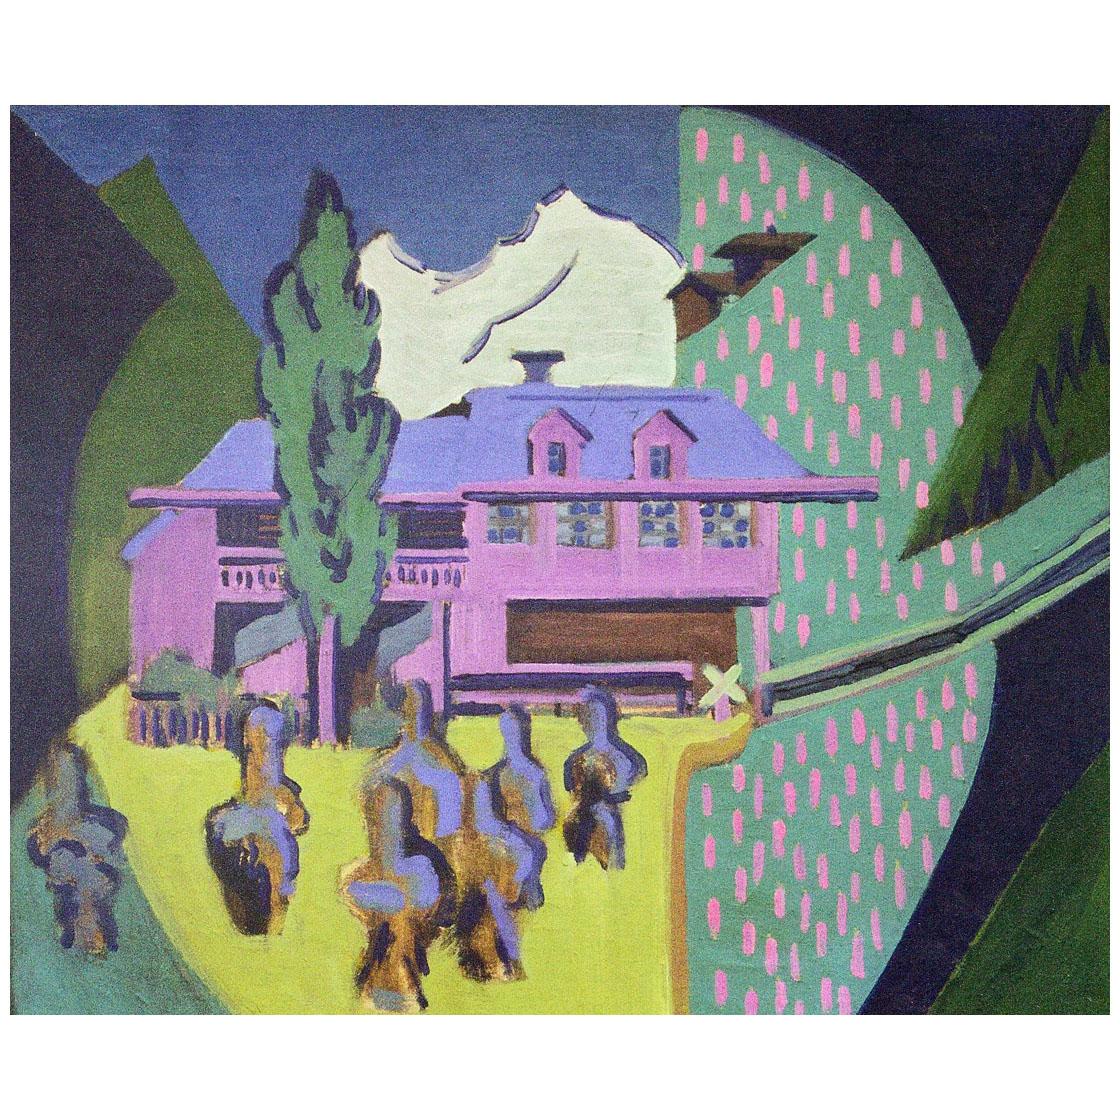 Ernst Ludwig Kirchner. Violet House. 1938. Private collection